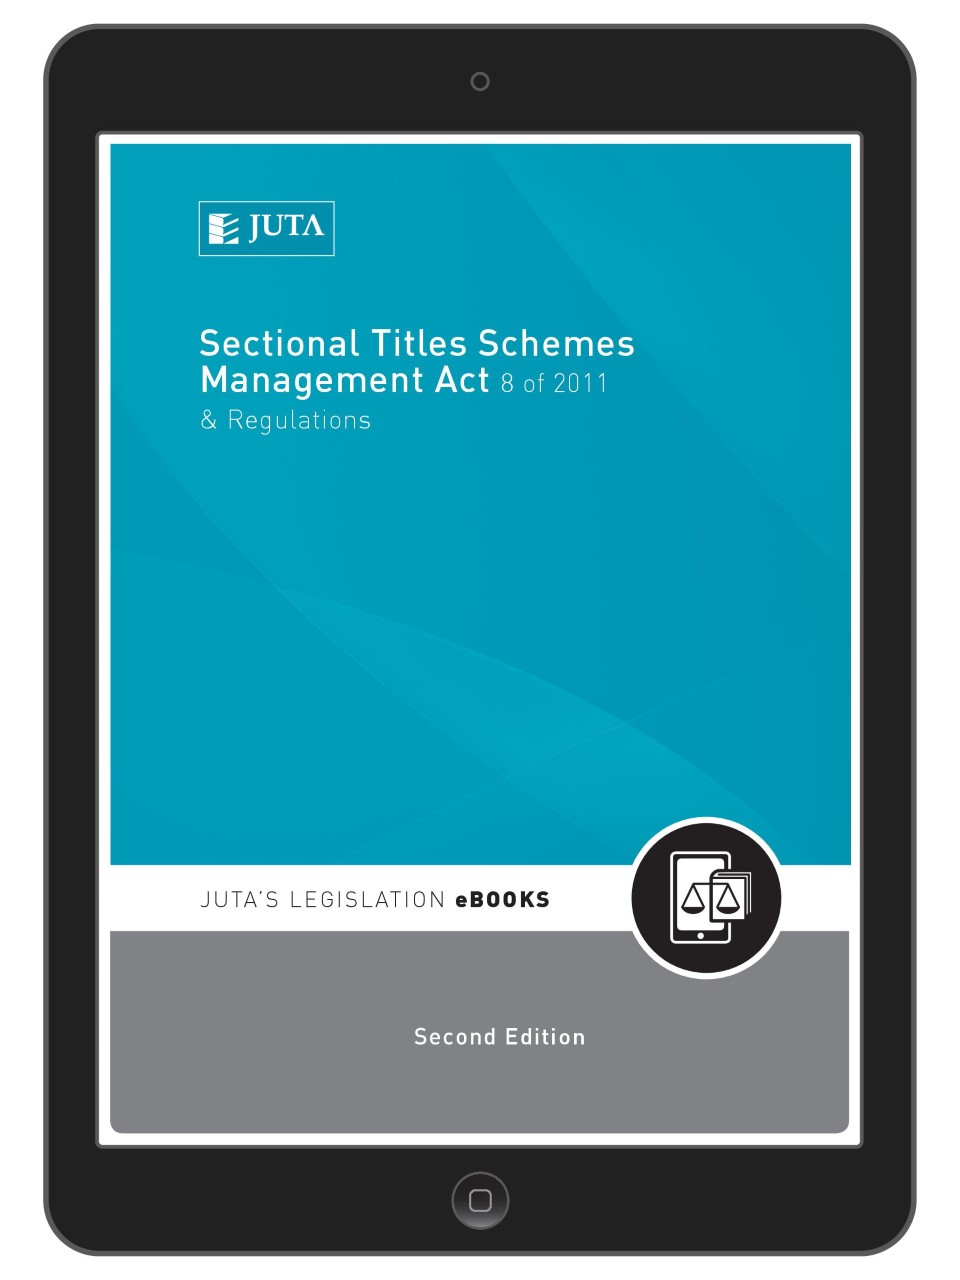 Sectional Titles Schemes Management Act 8 of 2011 & Regulations